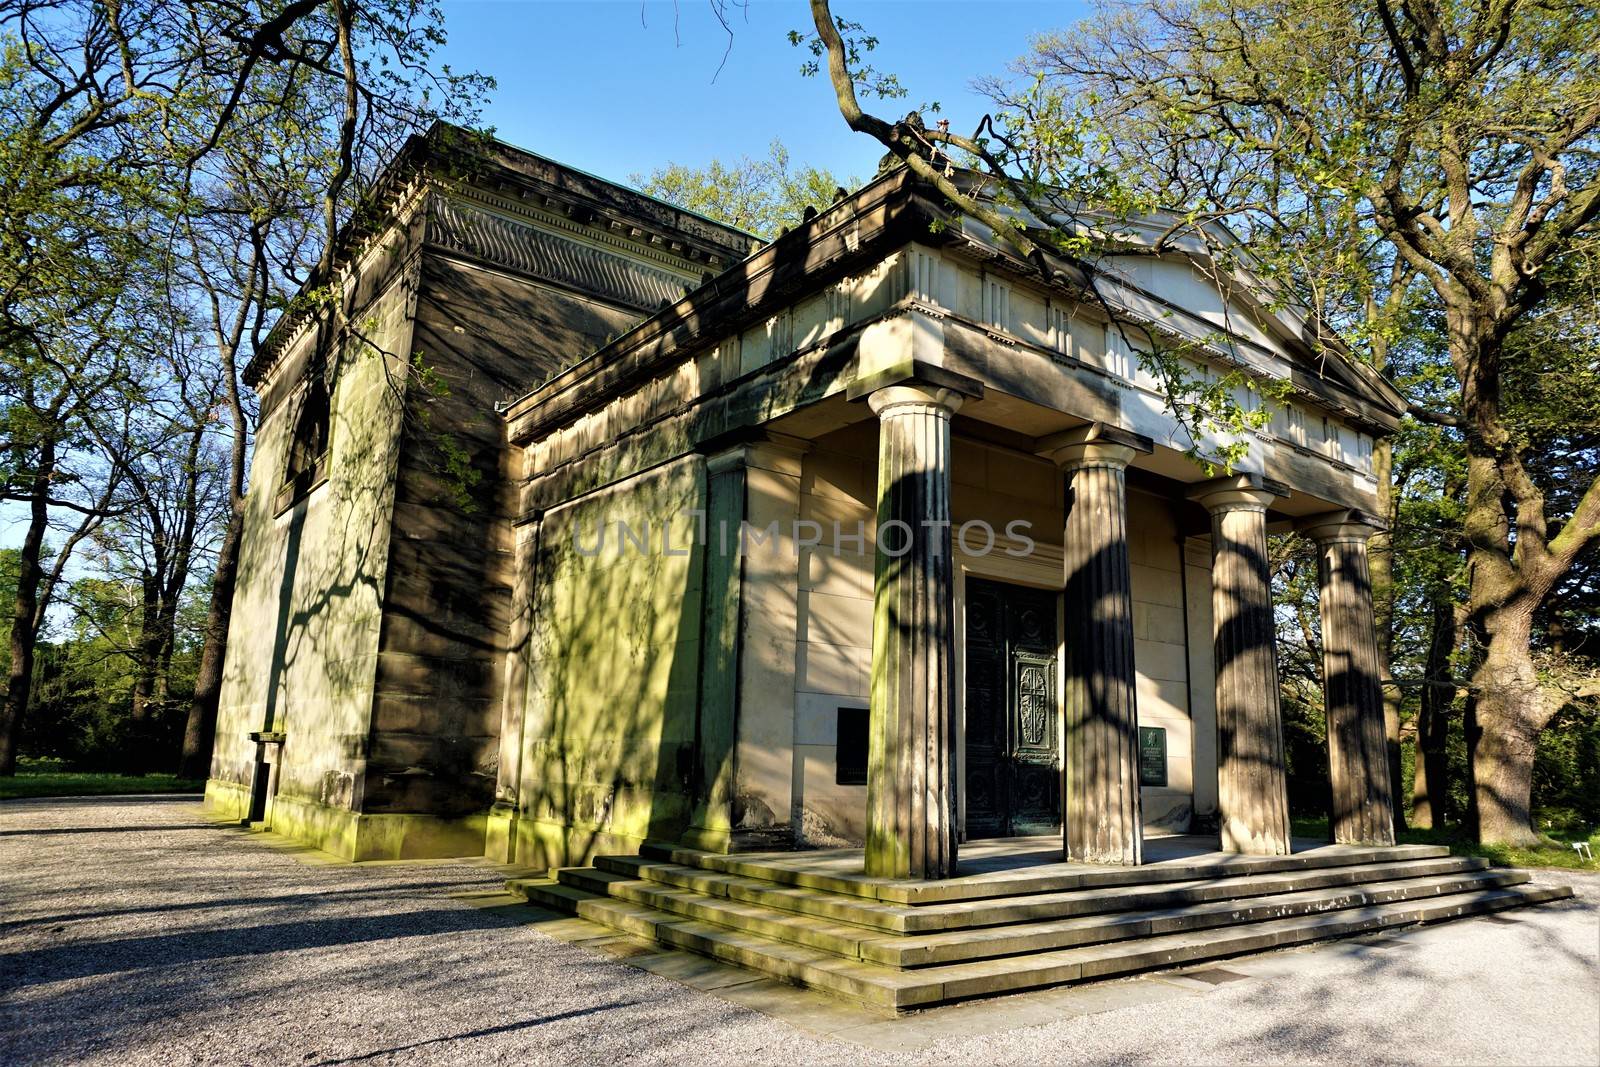 Side view of the mausoleum of the House of Welf in Hanover, Germany